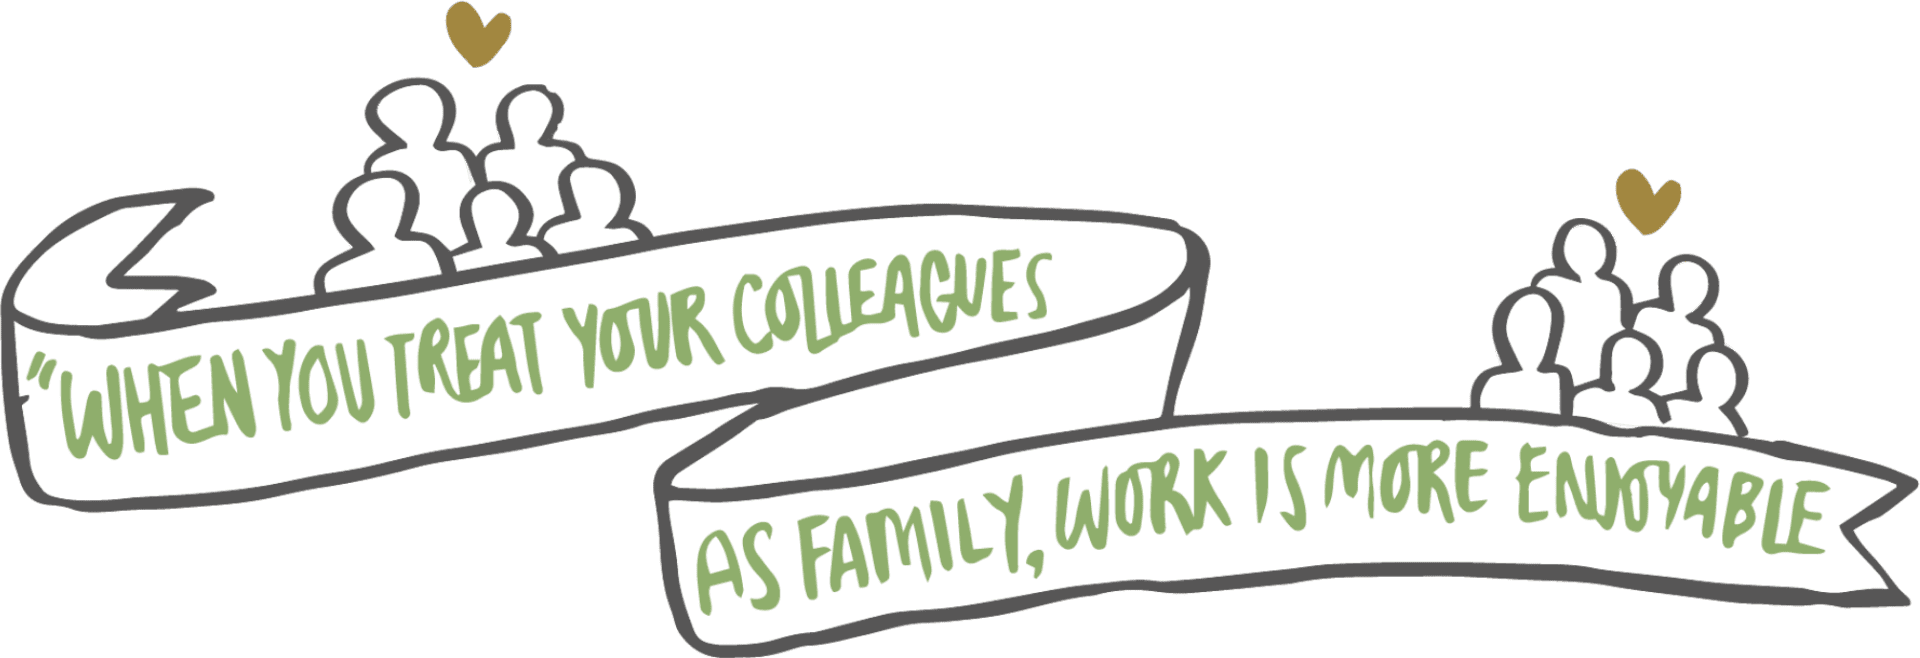 When you treat your colleagues as family, work is more enjoyable